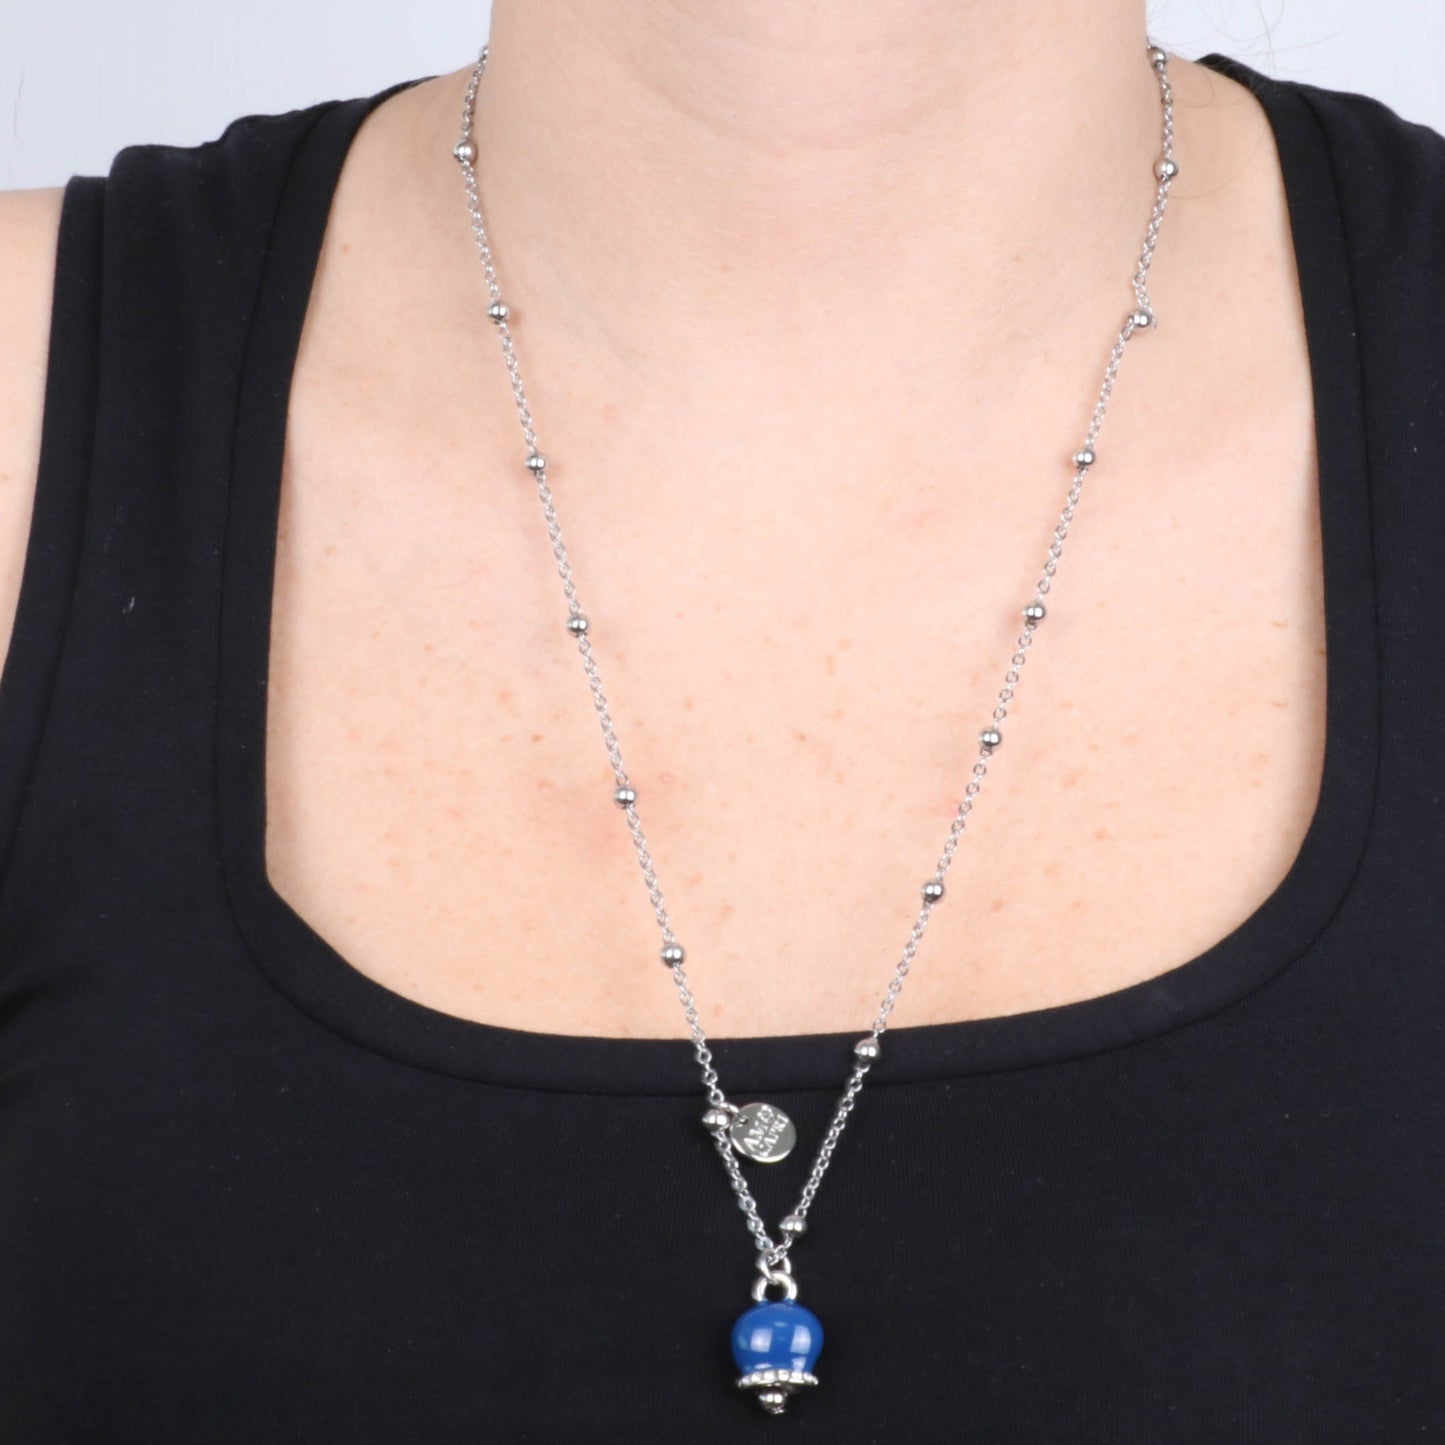 Metal necklace with pendant lucky charm, embellished with blue enamel and crystals